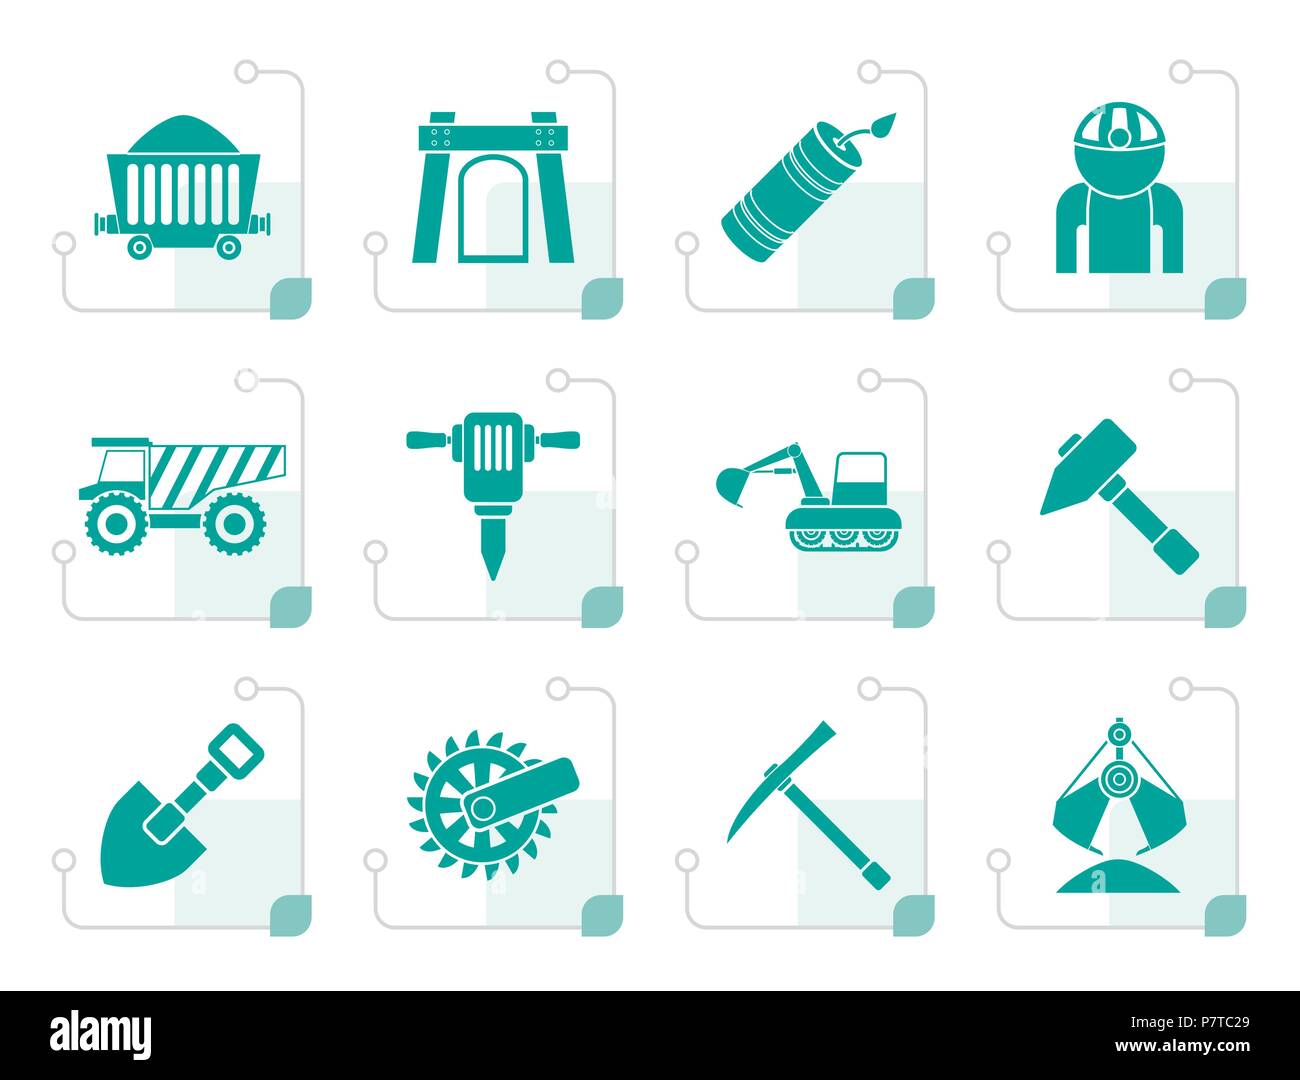 Stylized Mining and quarrying industry objects and icons - vector icon set Stock Vector